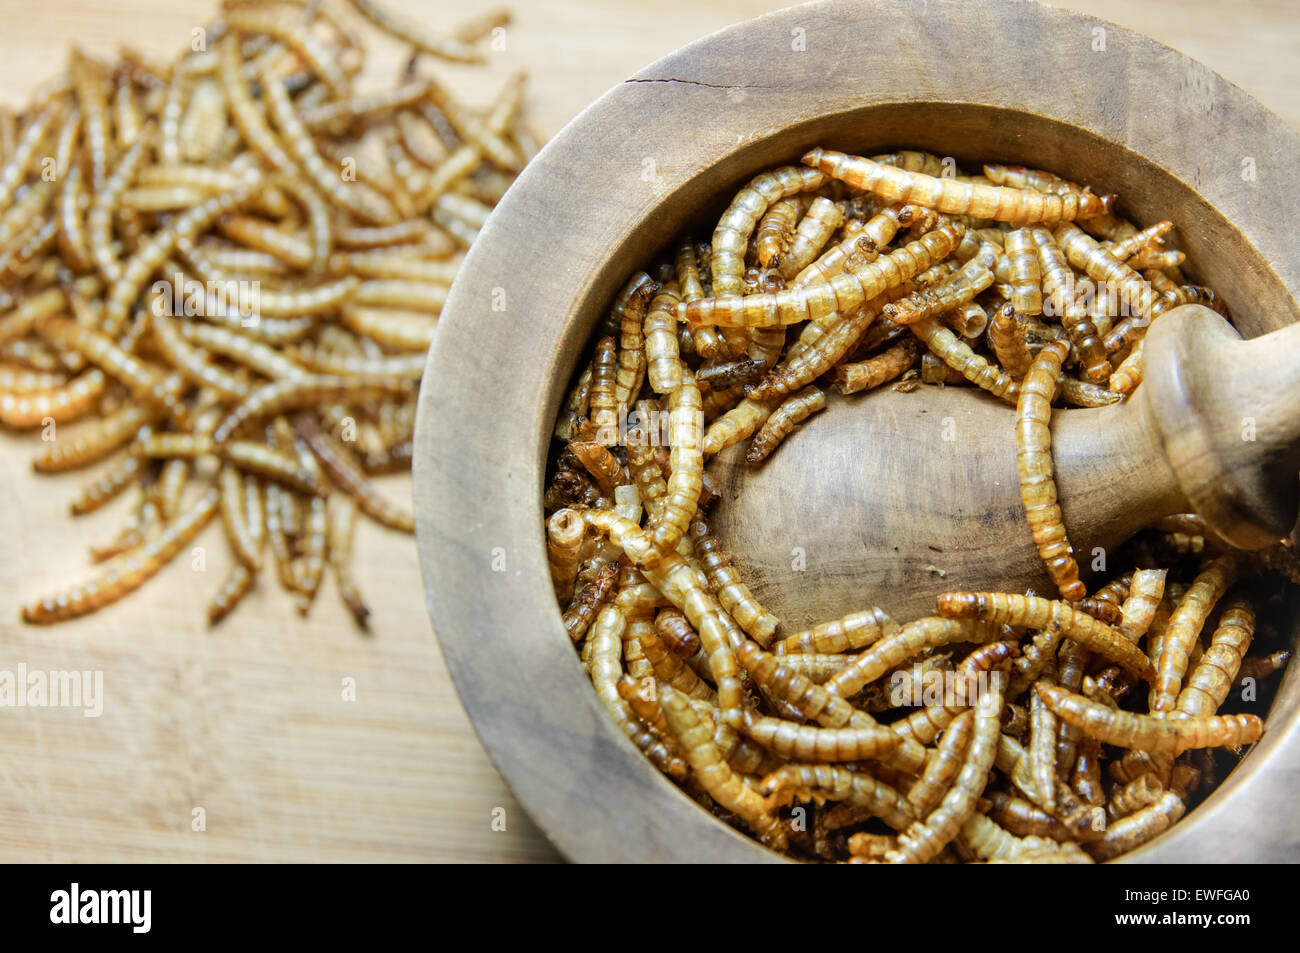 Dried mealworms in mortar Stock Photo